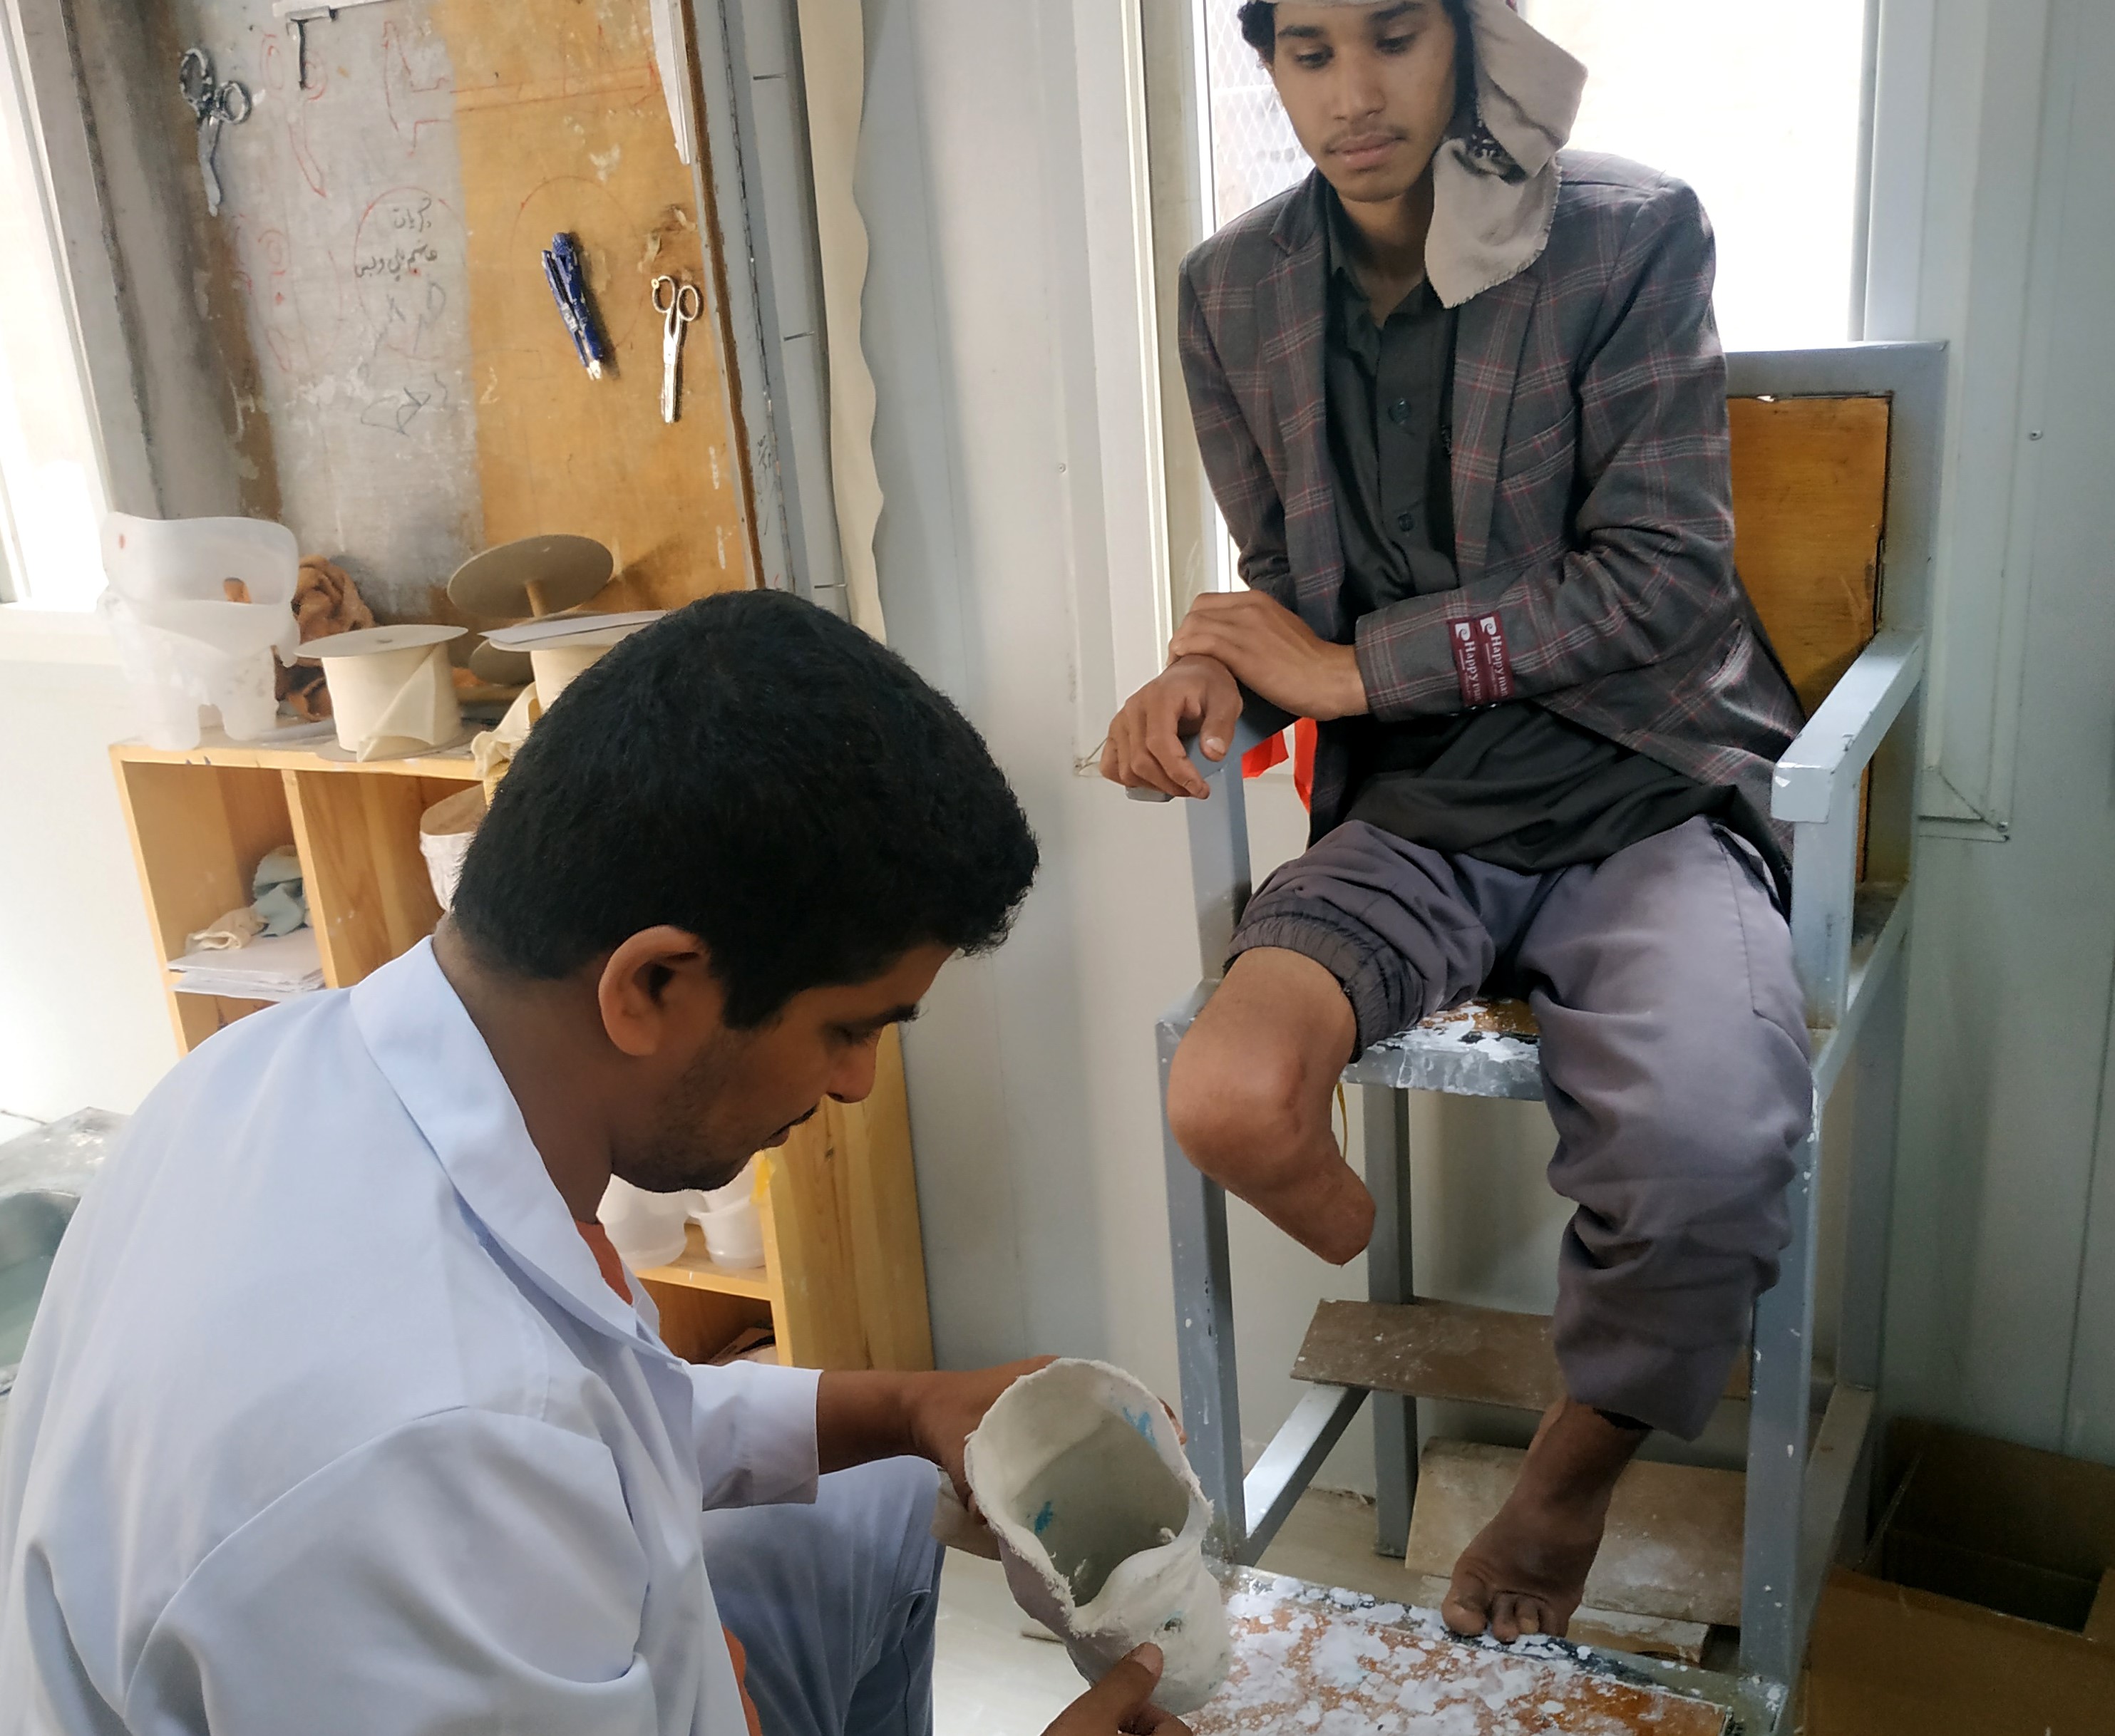 Abdel, victim of a landmine: “Thanks to my prosthesis, my life has changed!”